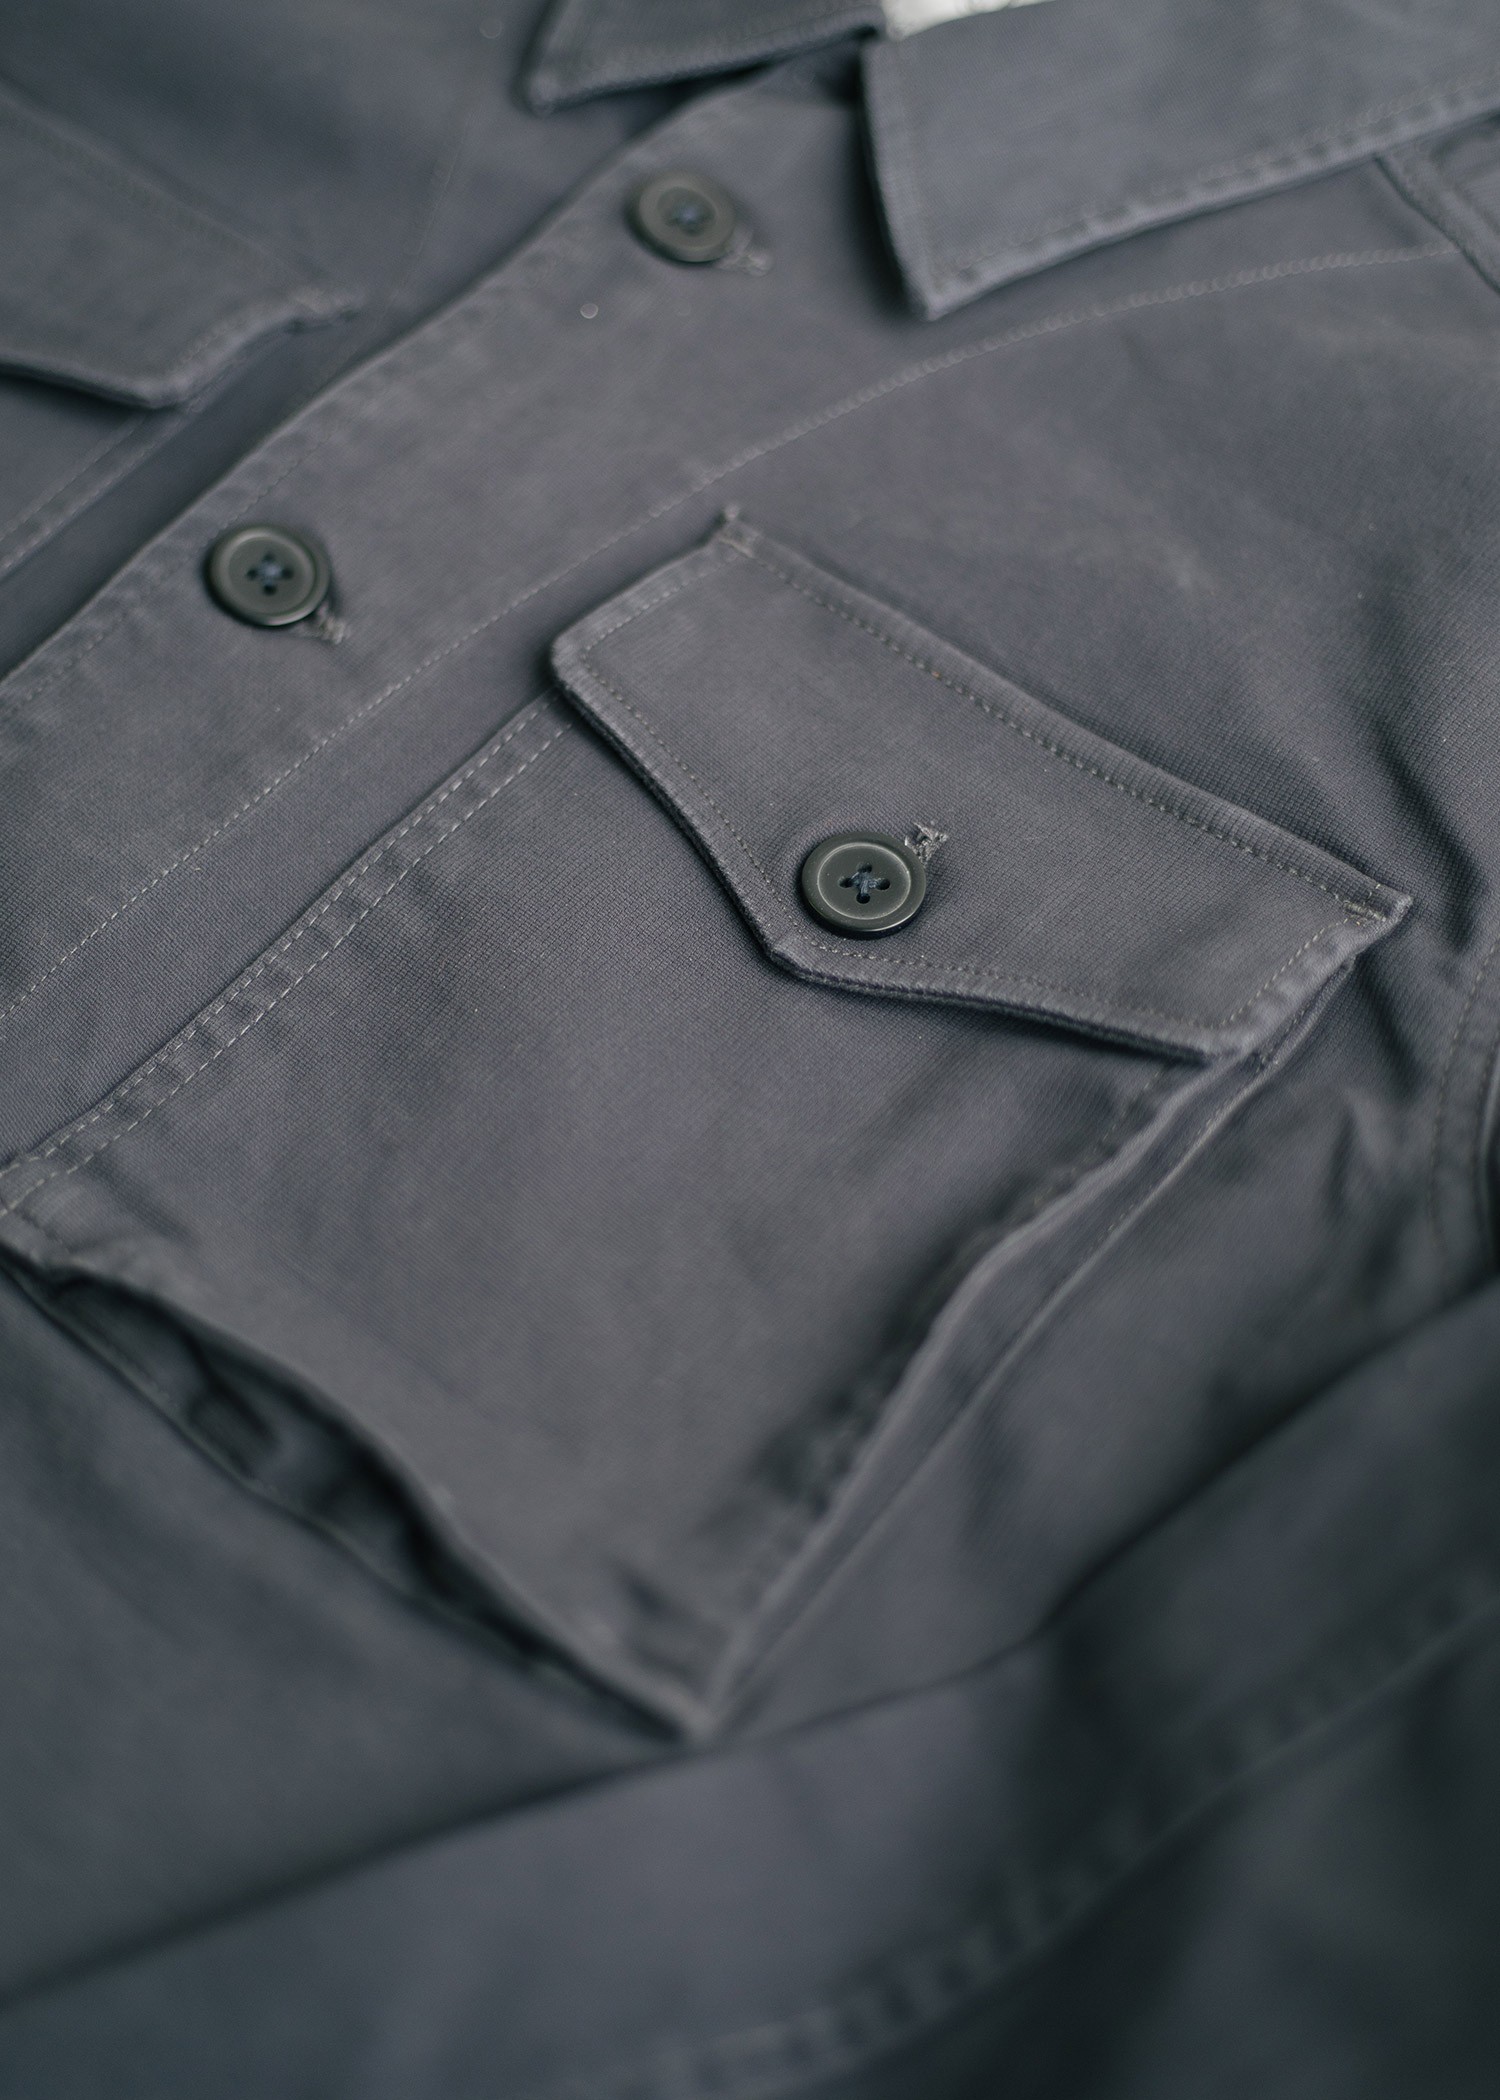 Military Bedford Cord Jacket - Iron and Resin